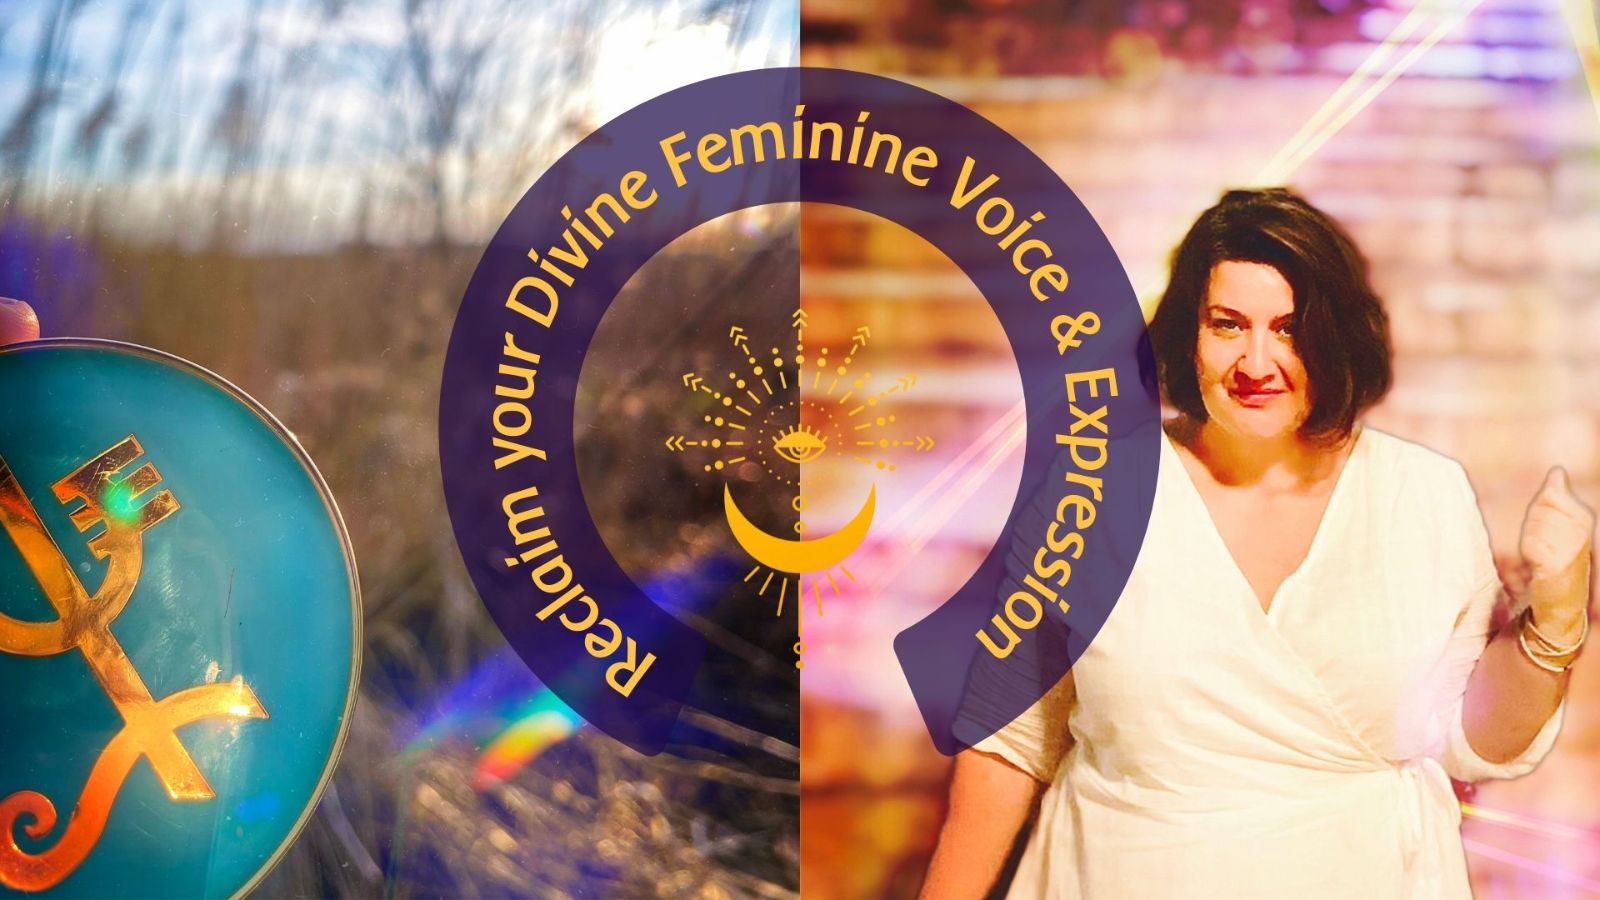 RE-CLAIM YOUR DIVINE FEMININE VOICE AND SELF-EXPRESSION